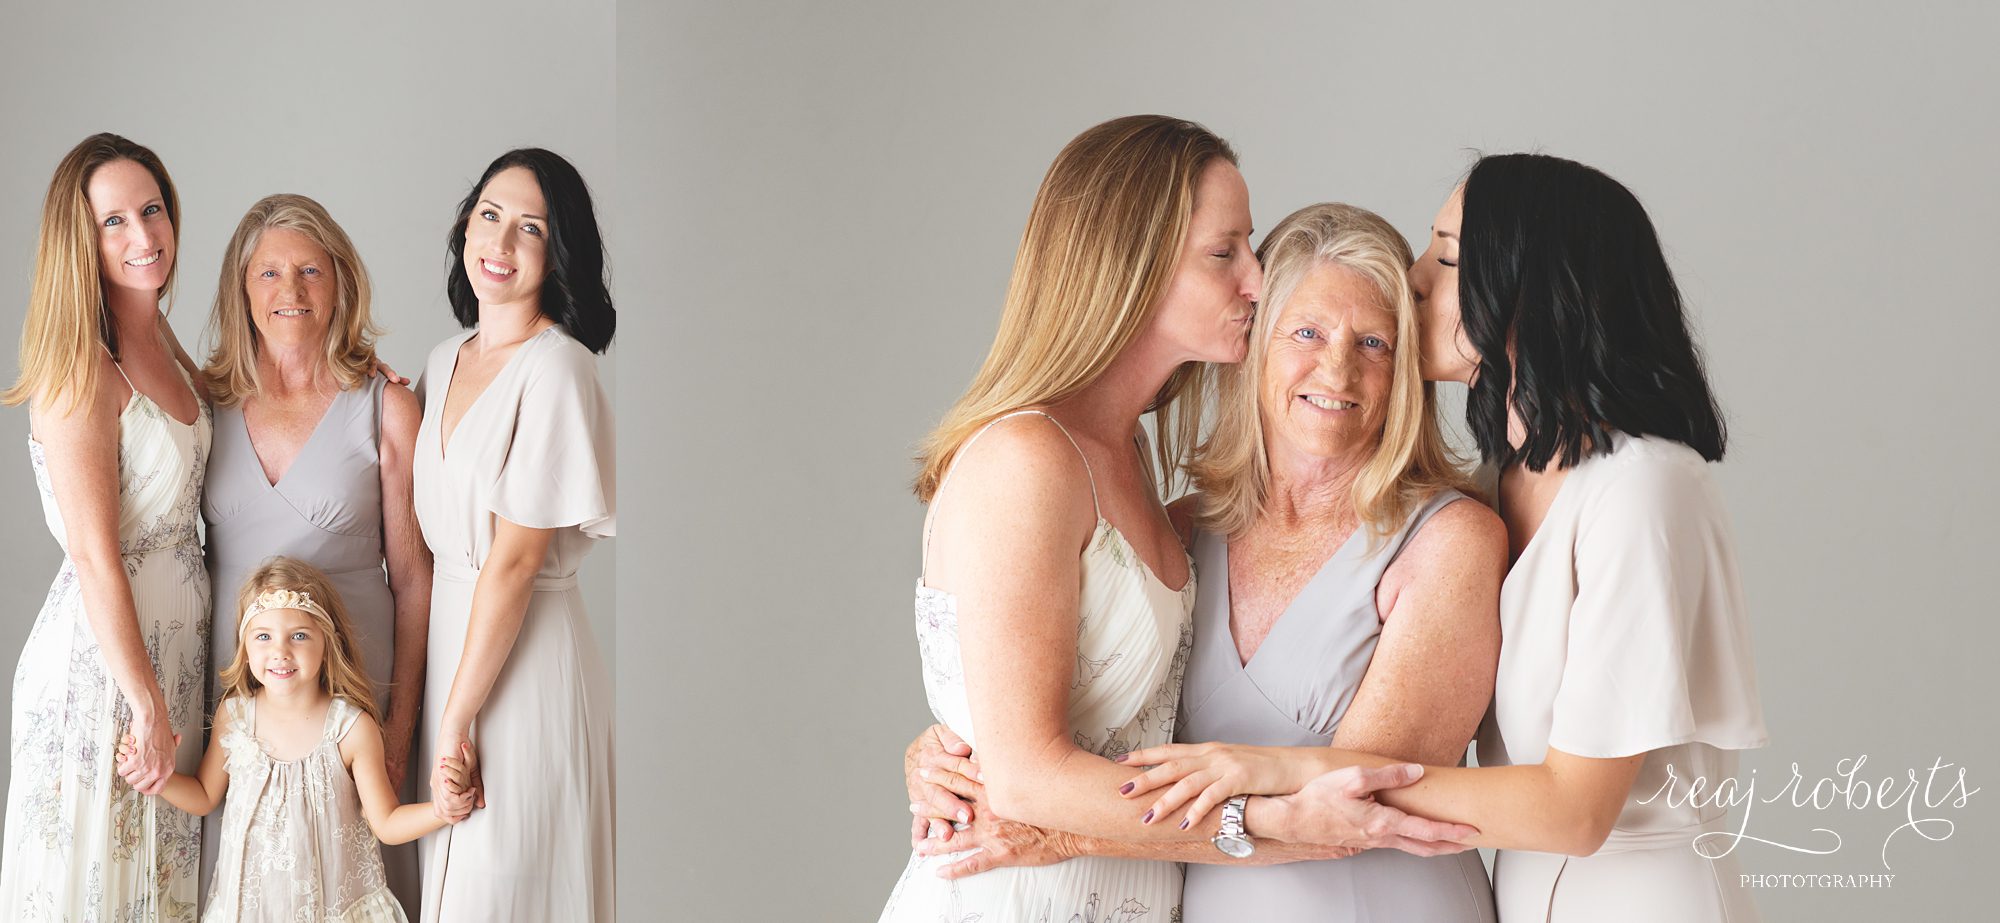 Generations photos with mothers, grandmothers and daughters by Reaj Roberts Photography